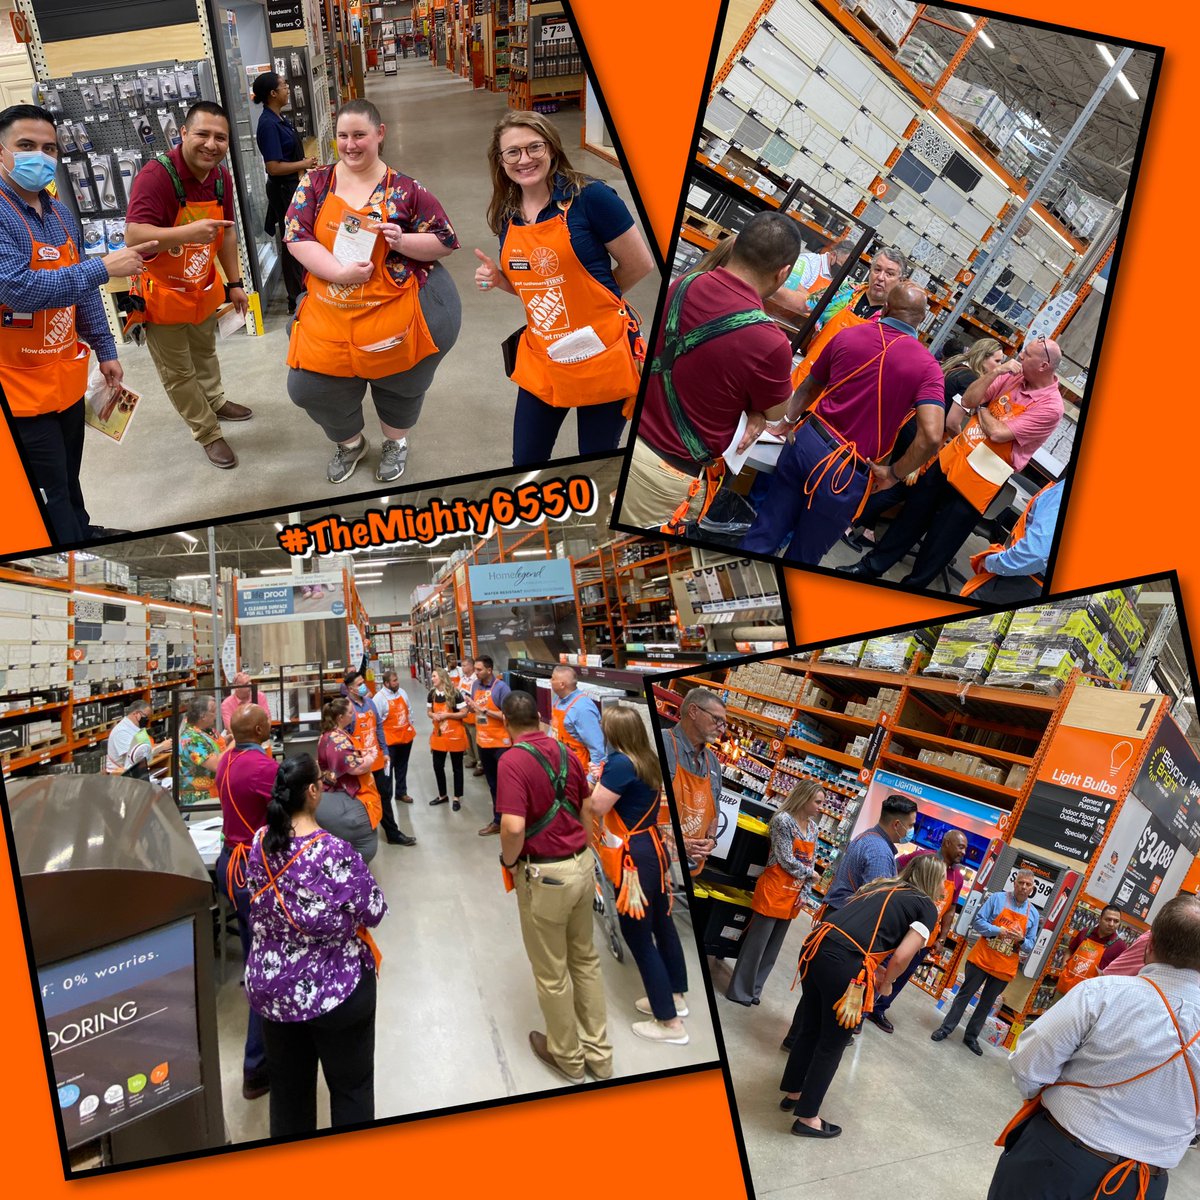 Great services walk today with the team! Very proud of my team and everything they are doing to drive this part of the business. #TheMighty6550 #Powerofthegulf @jreed4401 @LMcmilian @MervinTHD @bjp84